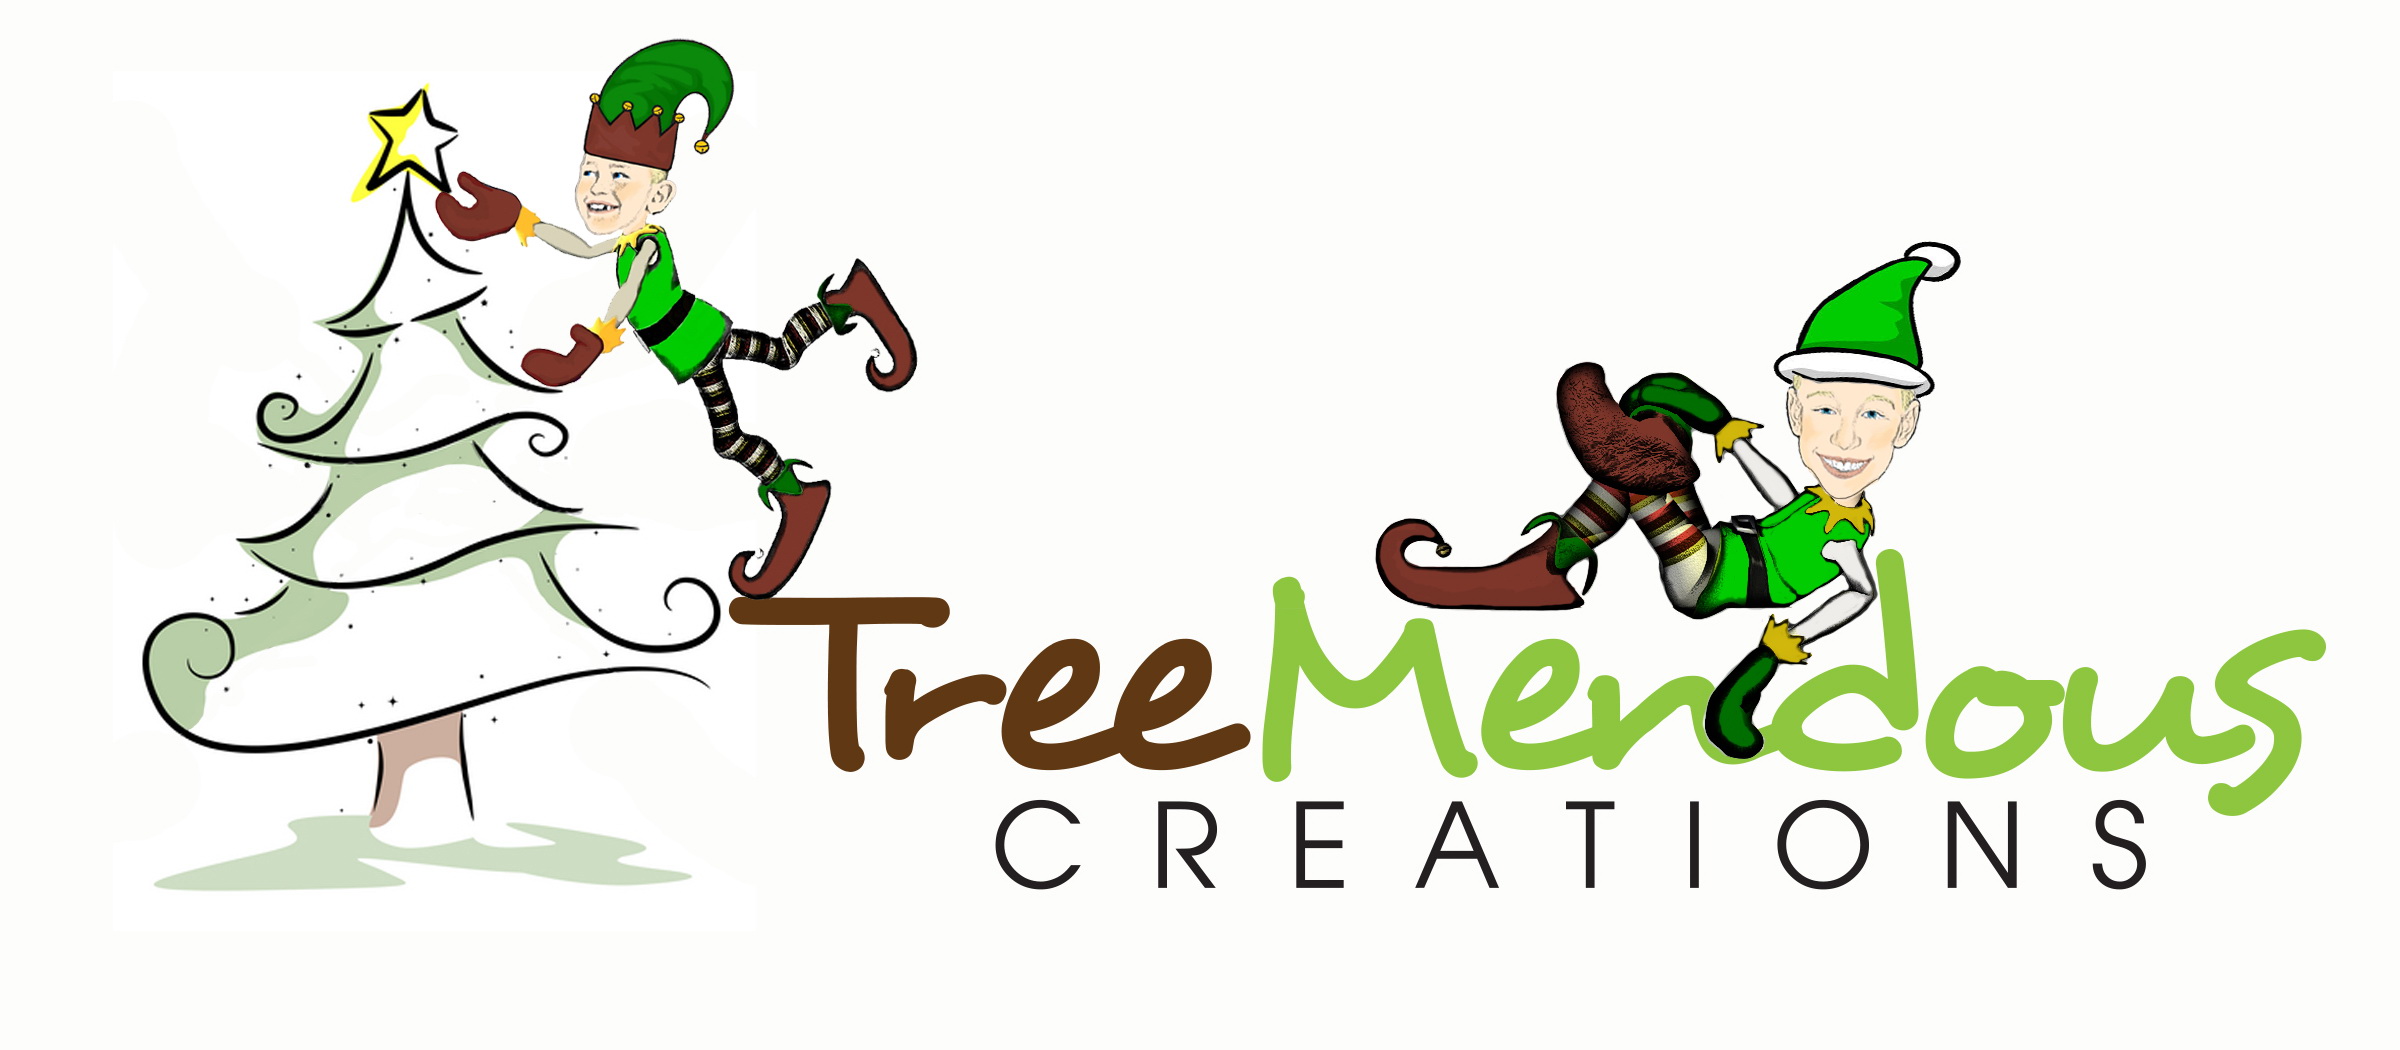 The Tree Mendious Creations will provide a whimsical and cozy feel to any space during special occasions